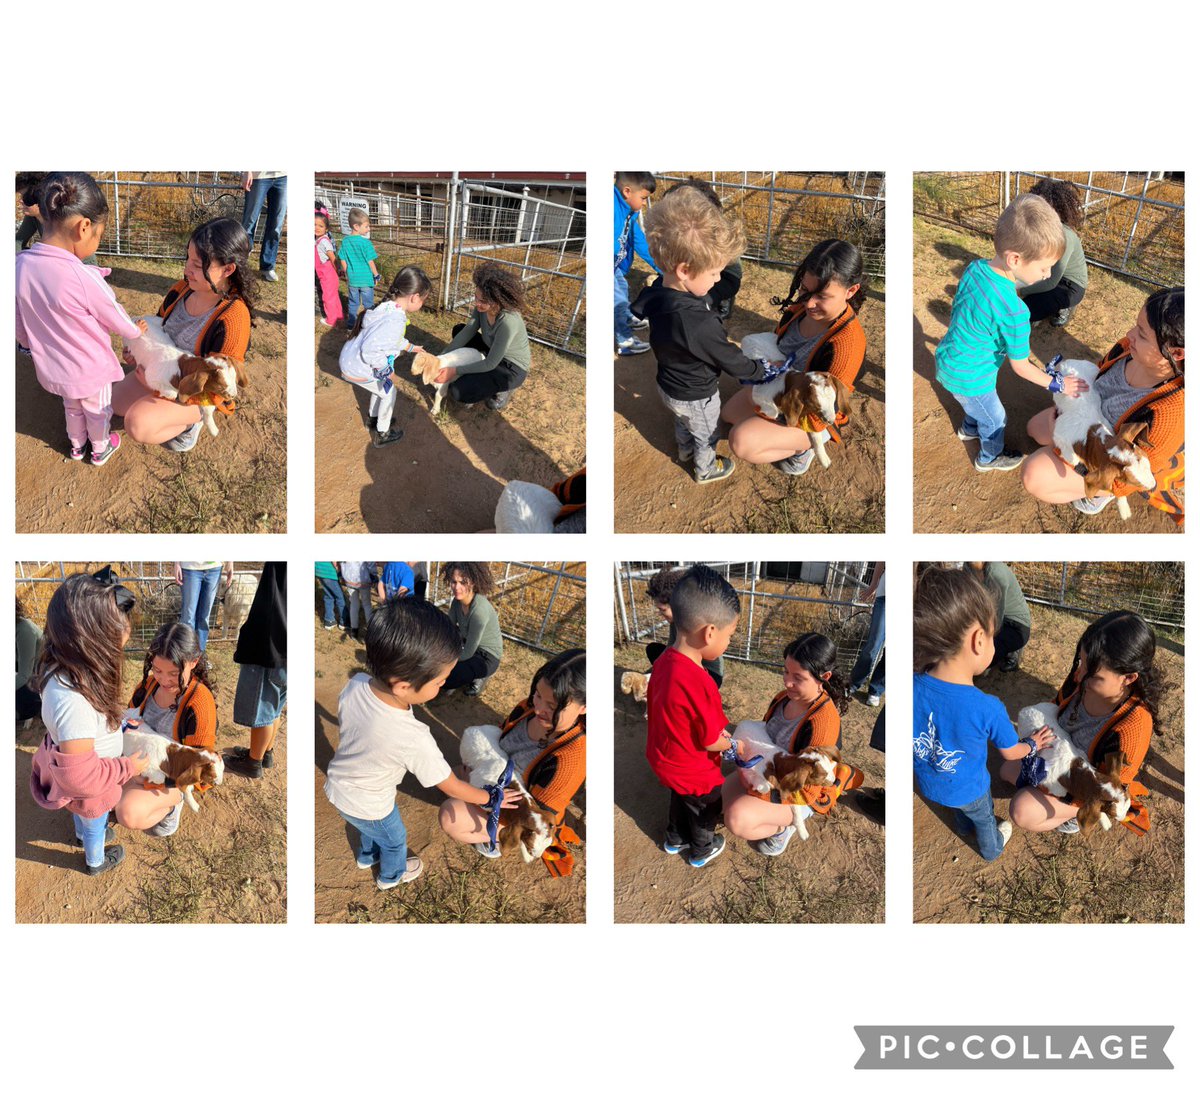 Pt. 2 At the @CTE_ECISD Ag. farm, we gathered eggs🐓🥚 , we met Lincoln the donkey 🫏, planted plants 🌱, and pet baby goats 🐐! What an amazing day of learning and fun for @ZavalaMagnet PreK students! @EctorCountyISD @ECISD_EarlyEd